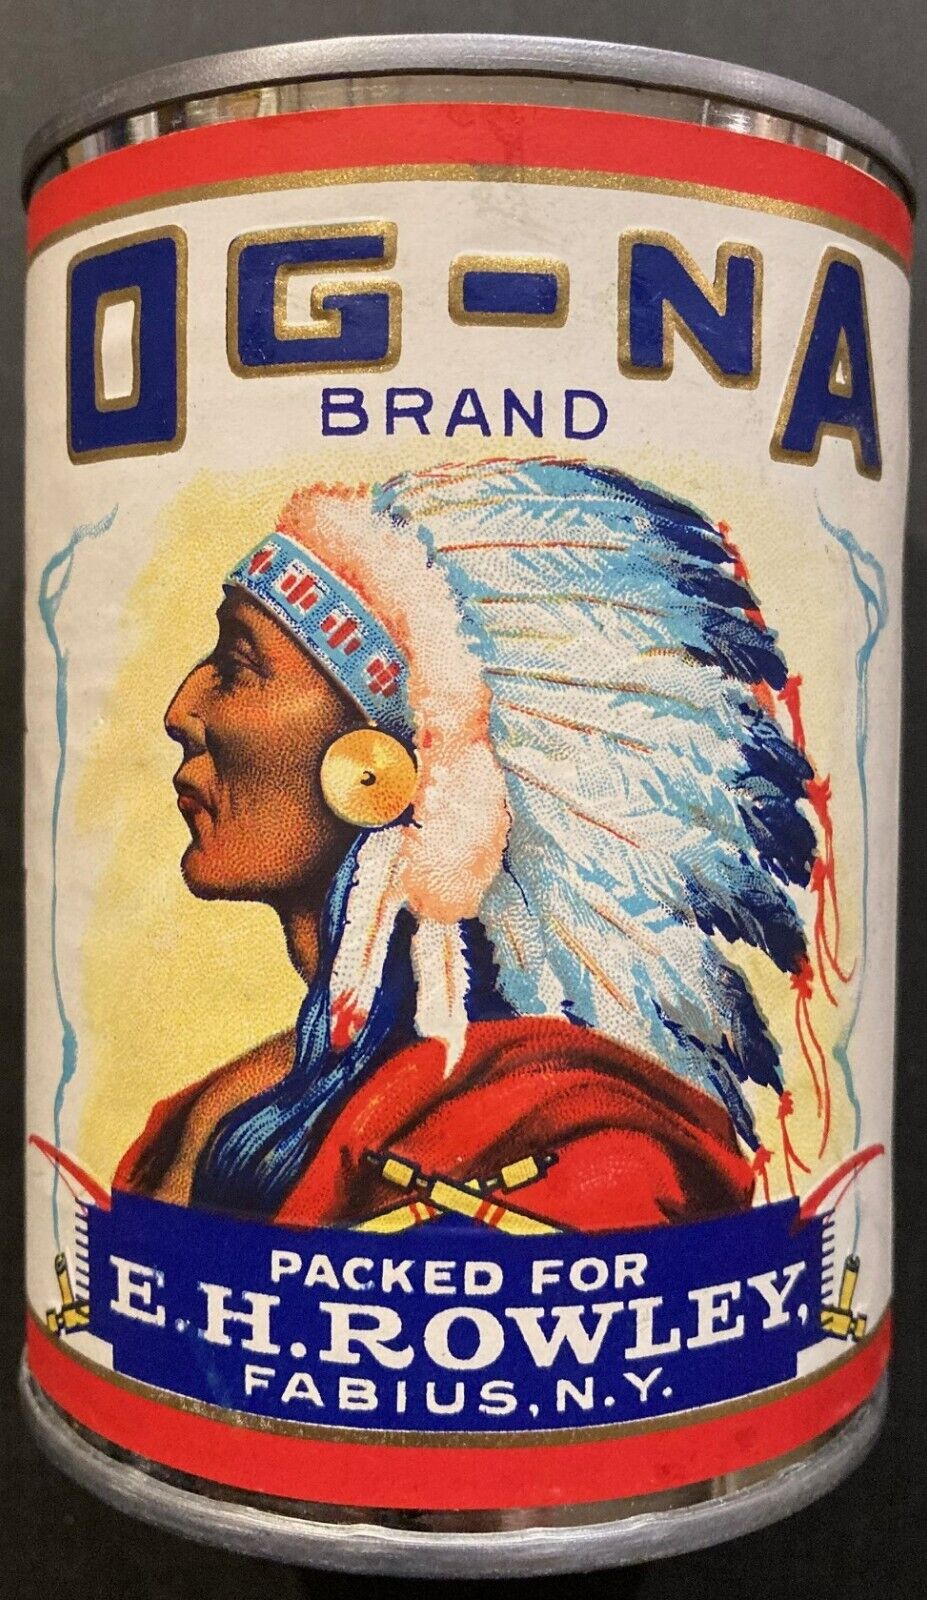 1950s OG-NA Brand Label & Tin Native American Chief on the front - Fabius, N.Y.